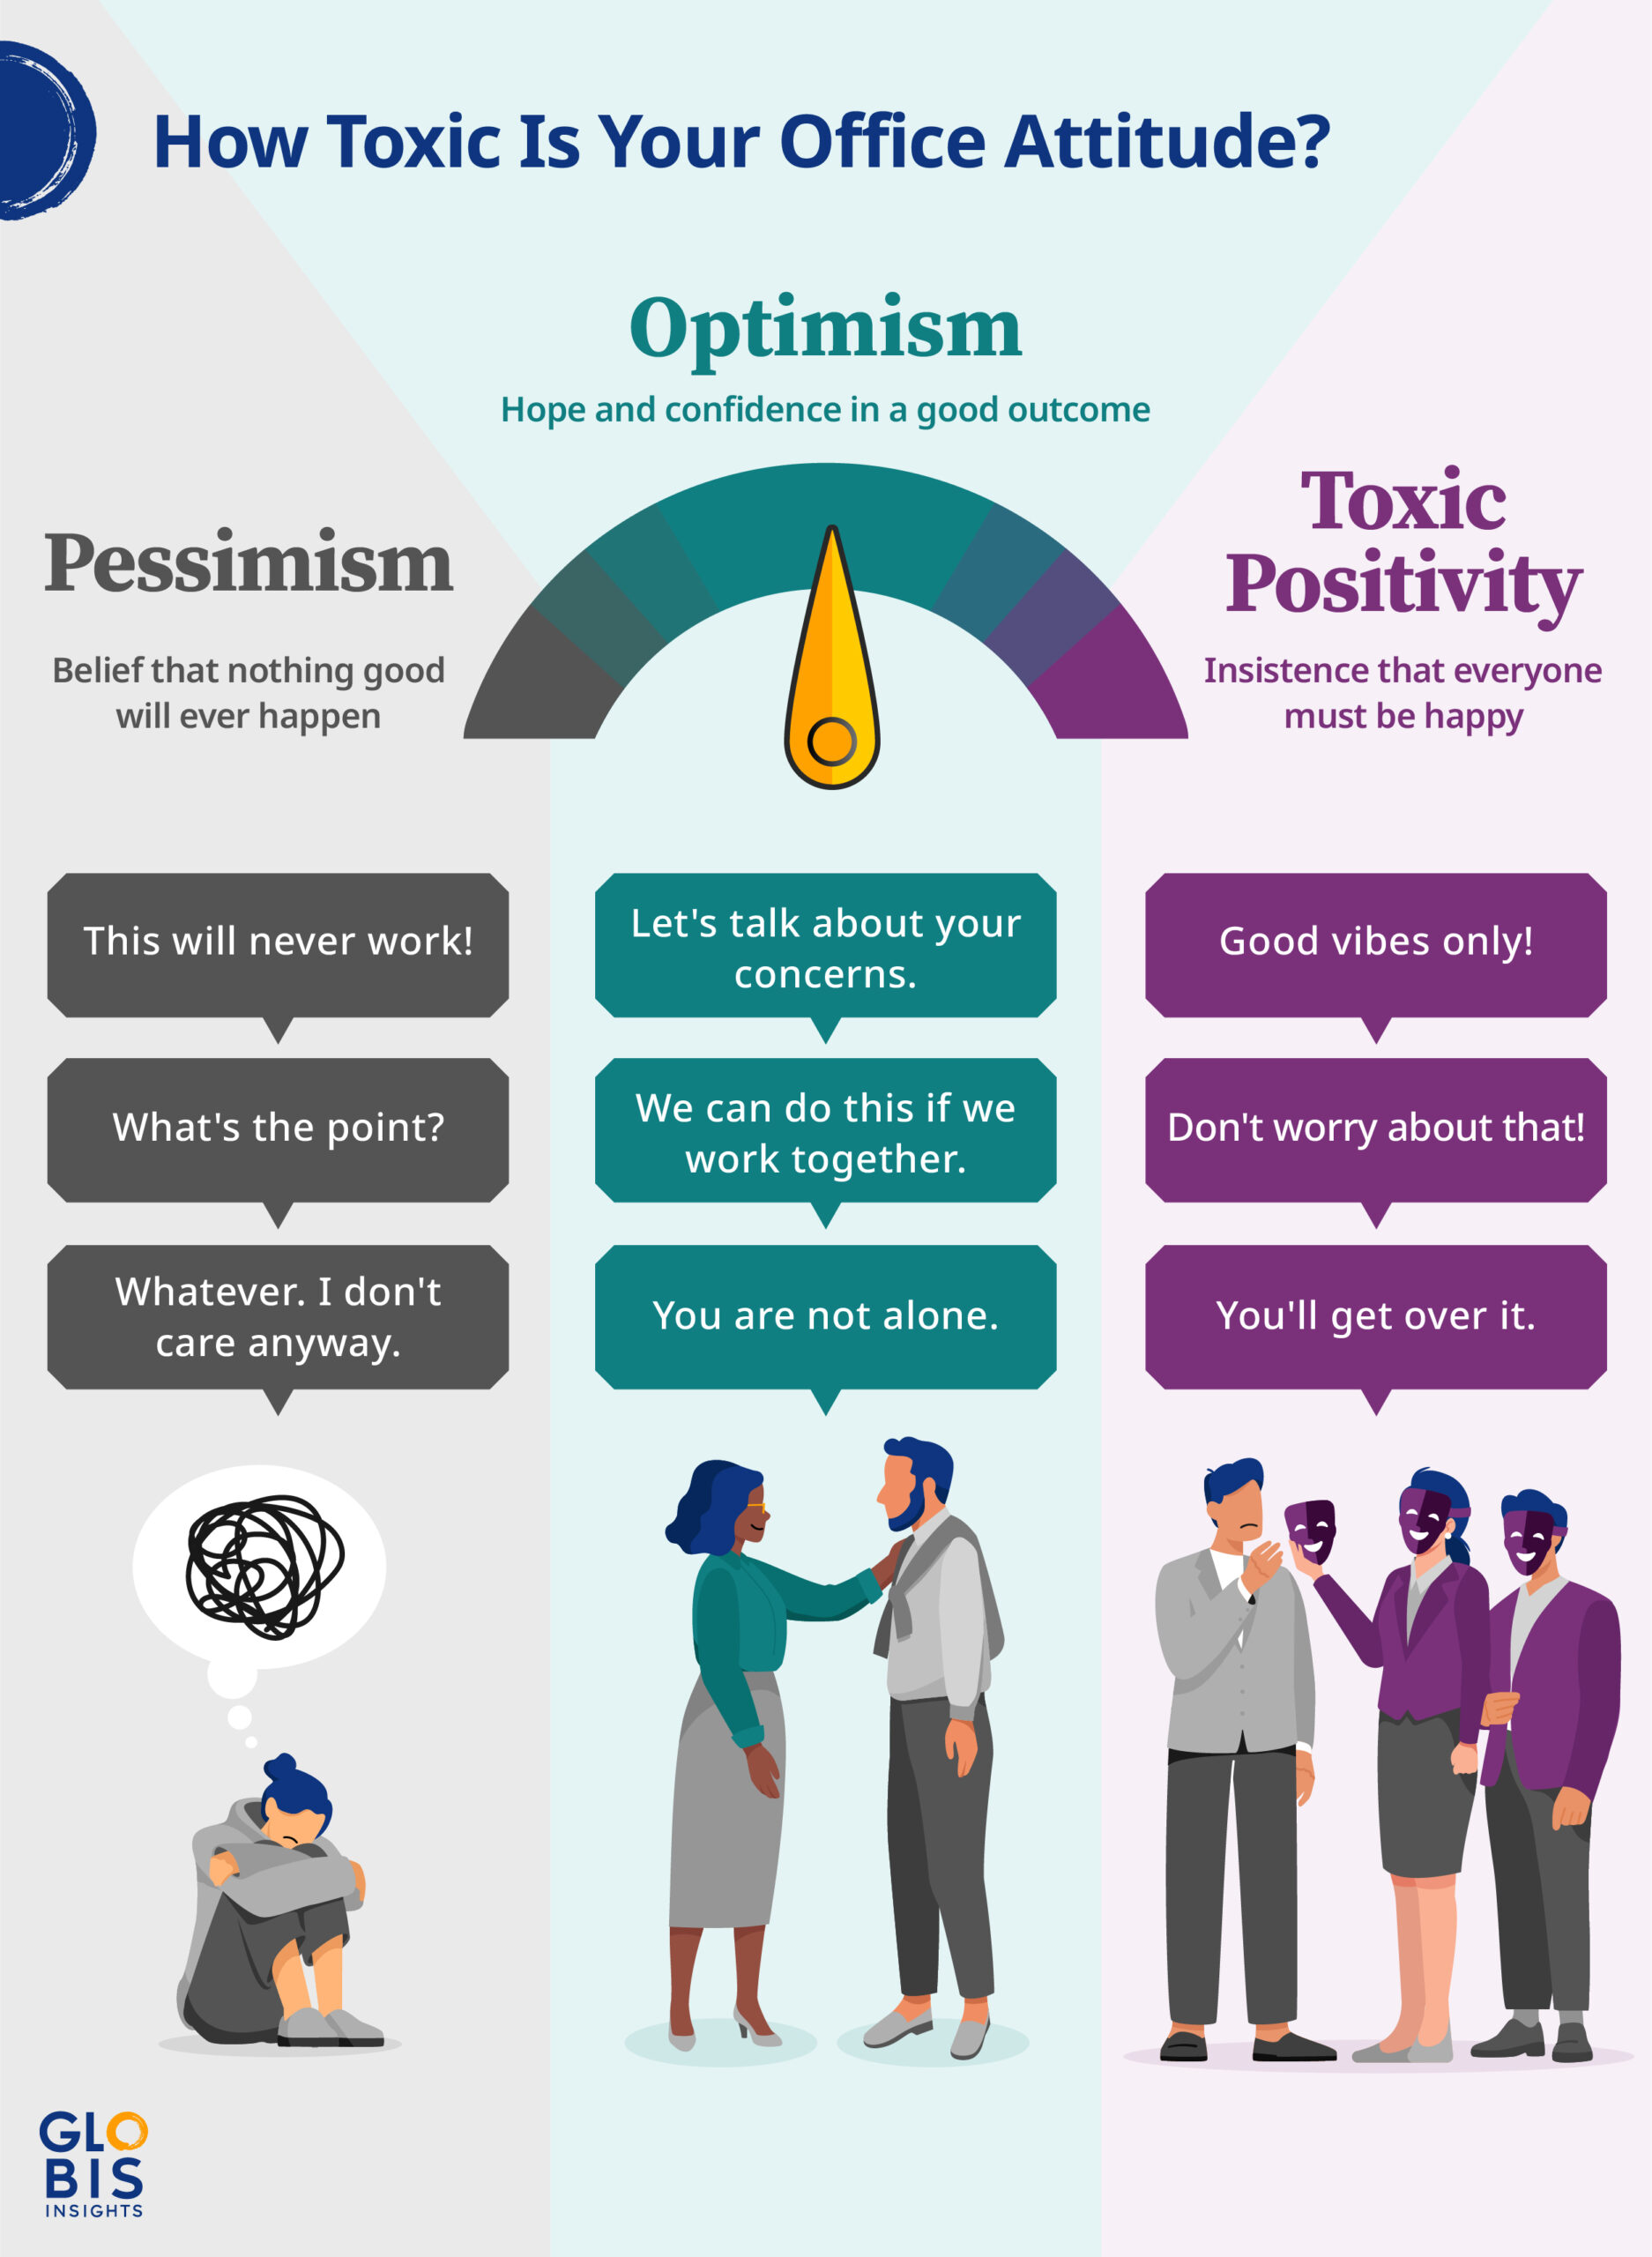 Infographic "How Toxic Is Your Office Attitude?" showing the scale of Pessimism, Optimism, and Toxic Positivity